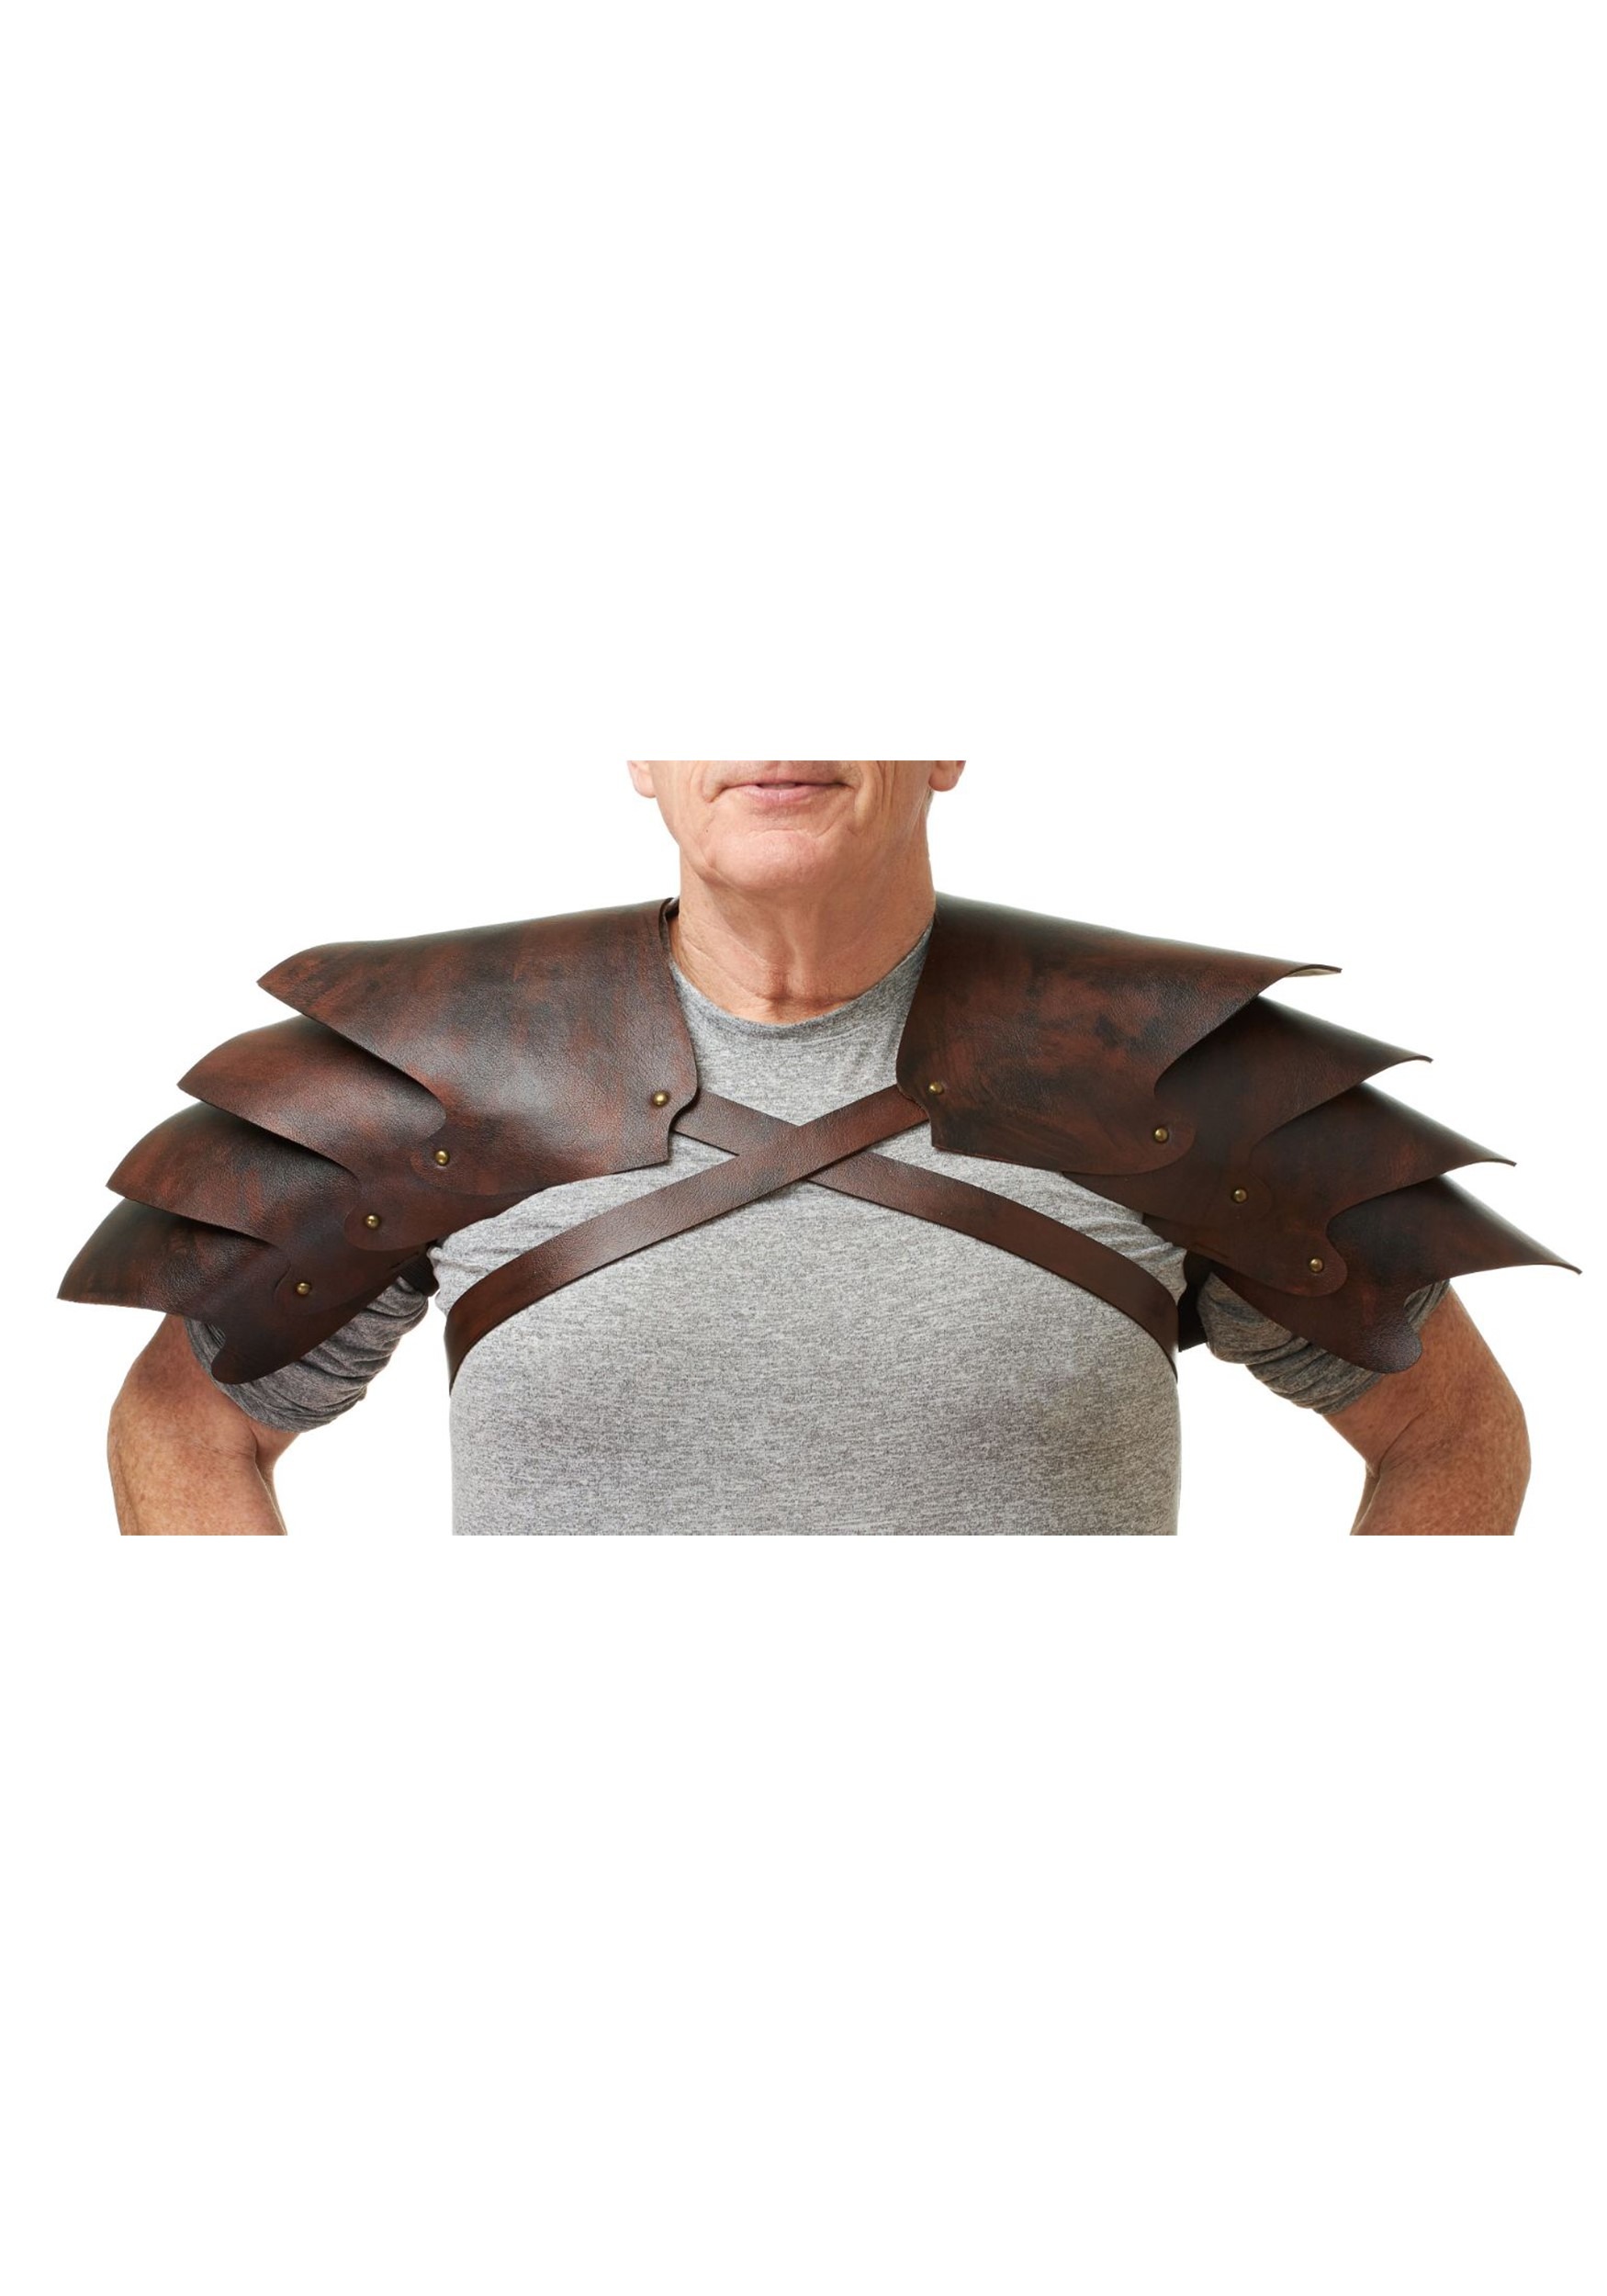 Faux Leather Shoulder Armor Accessory